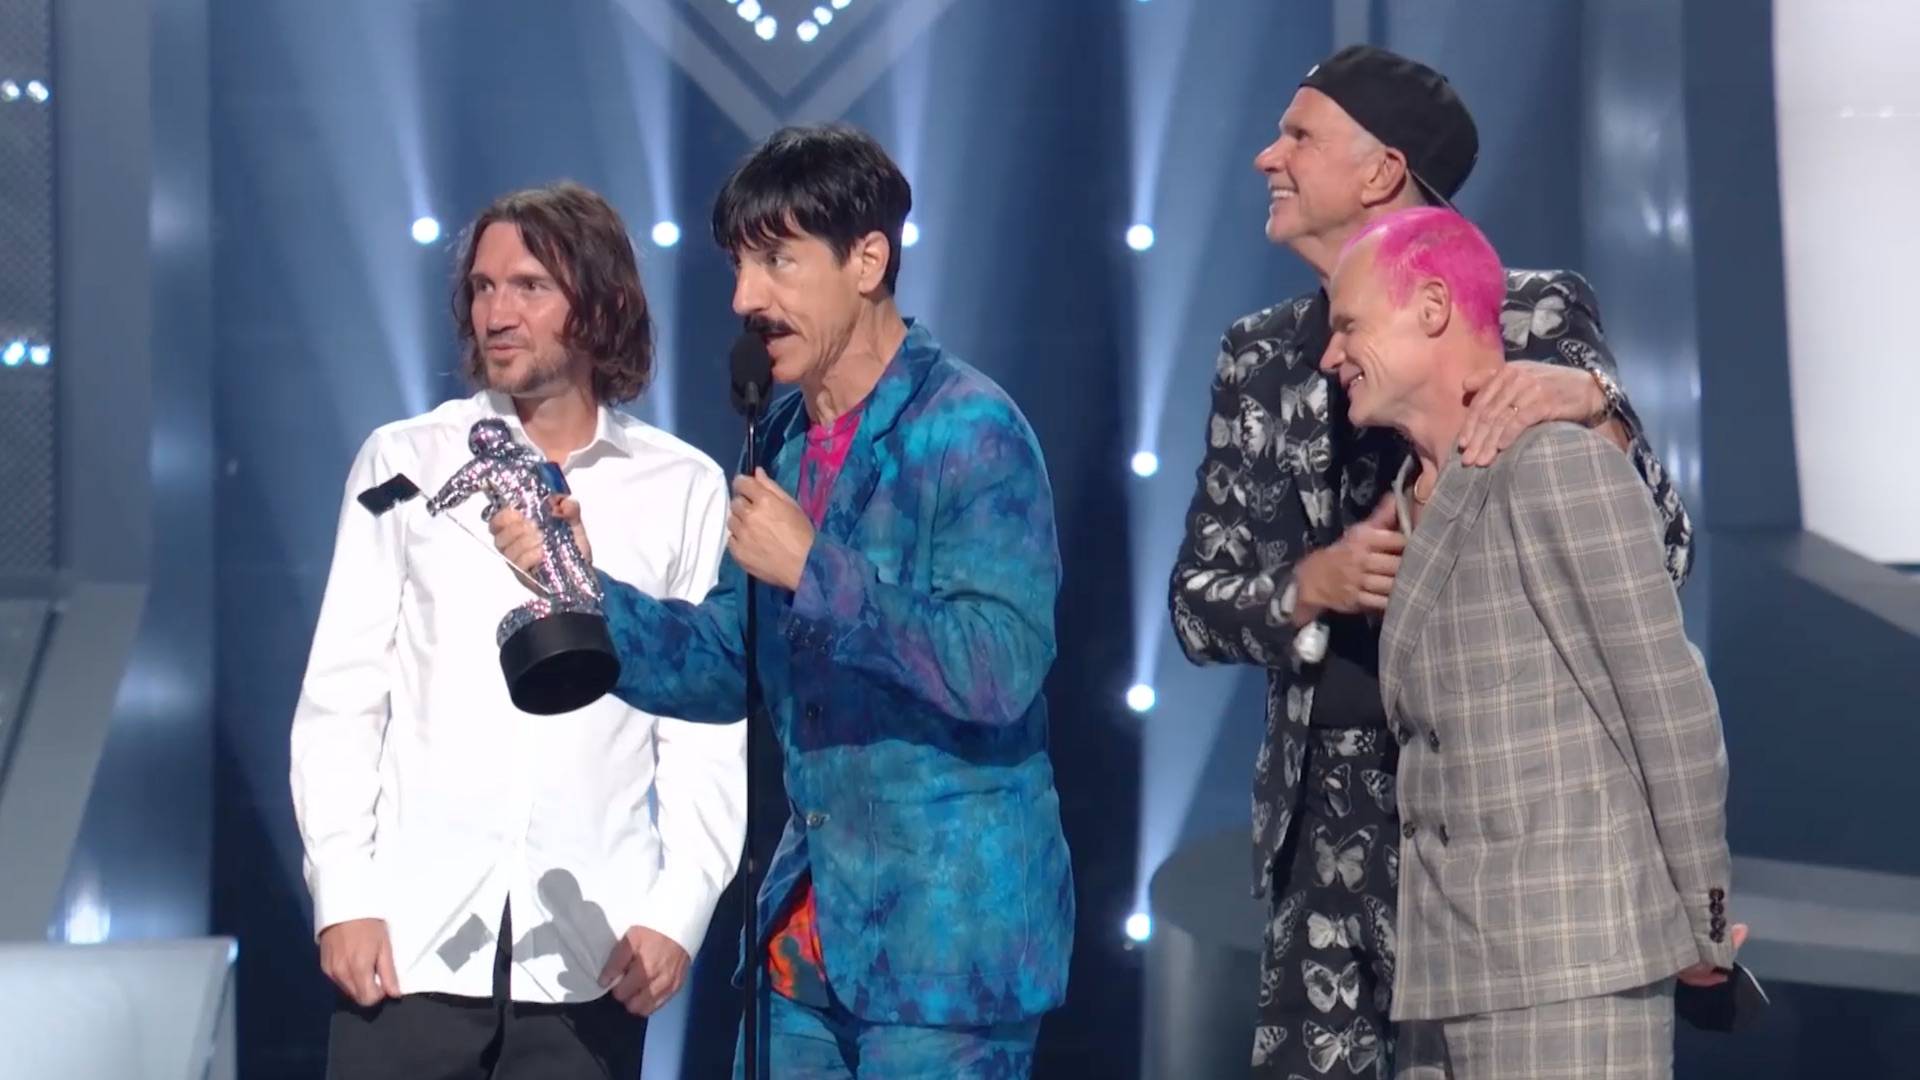 Red Hot Chili Peppers accepts the Best Rock Award for their song “Black Summer” at the MTV VMAs 2022.